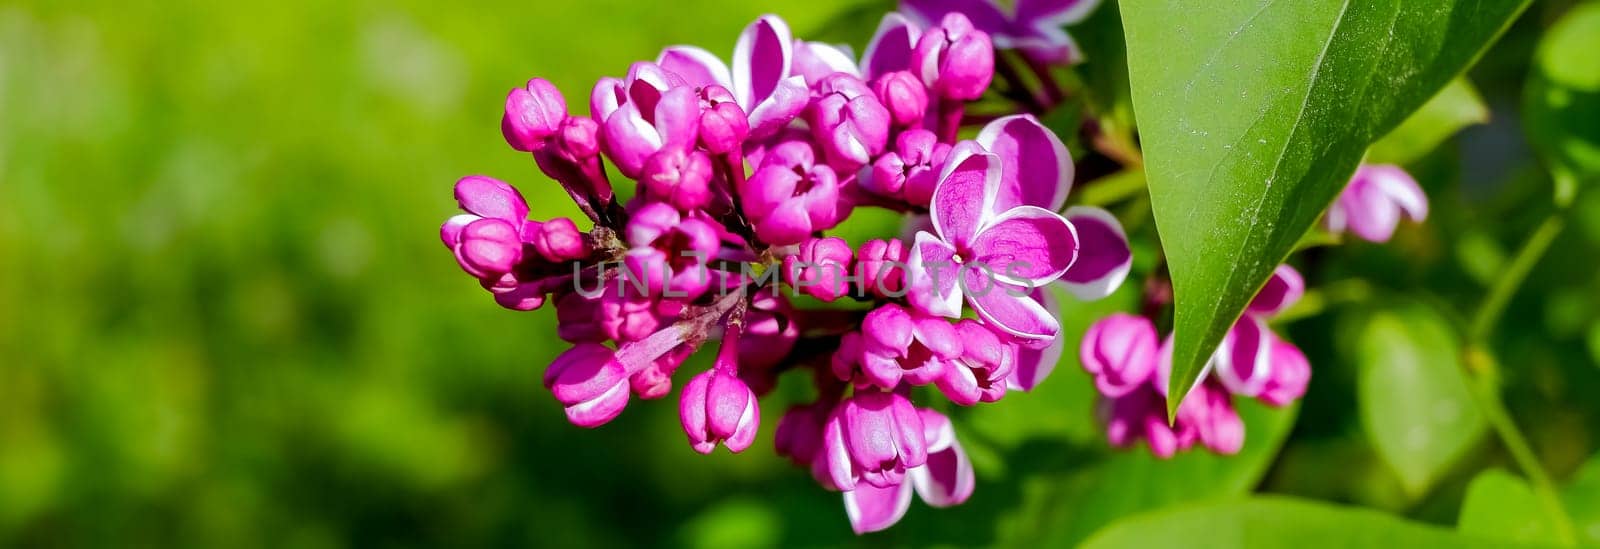 Lilac bush over sky background. Lilac flowers in garden or park. Nature background, banner